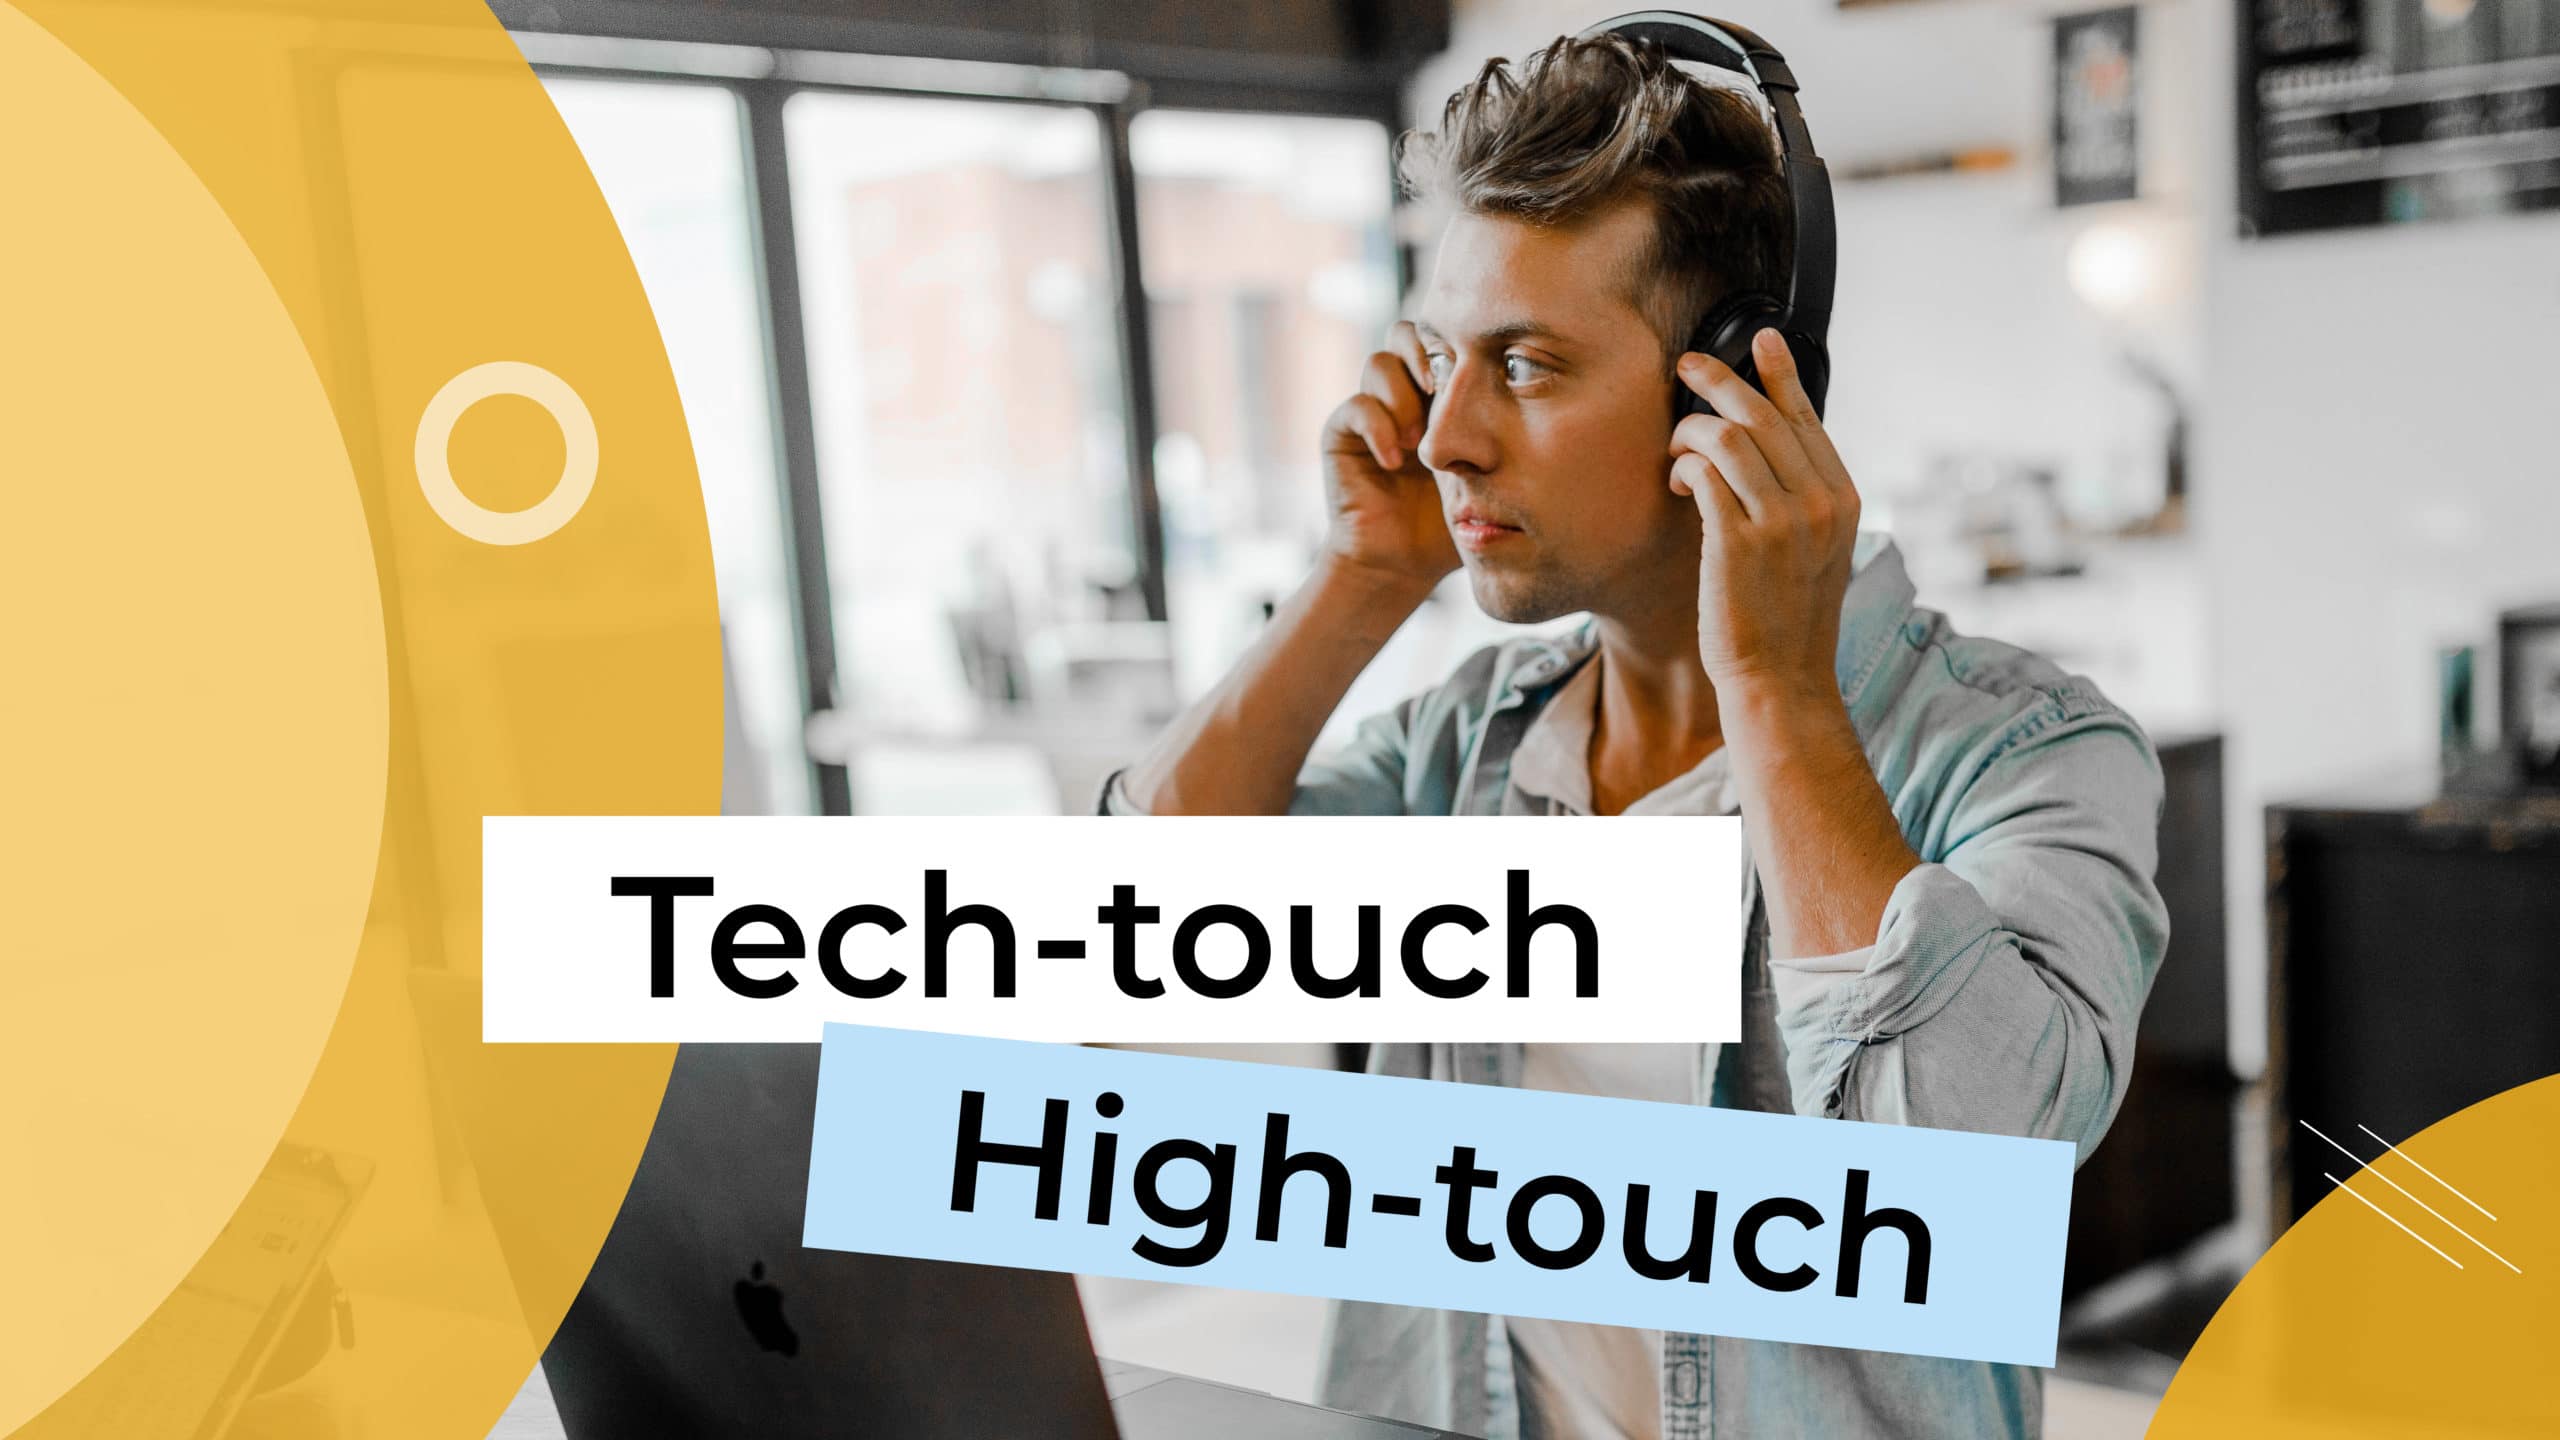 Tech-touch can be the new high-touch in customer success